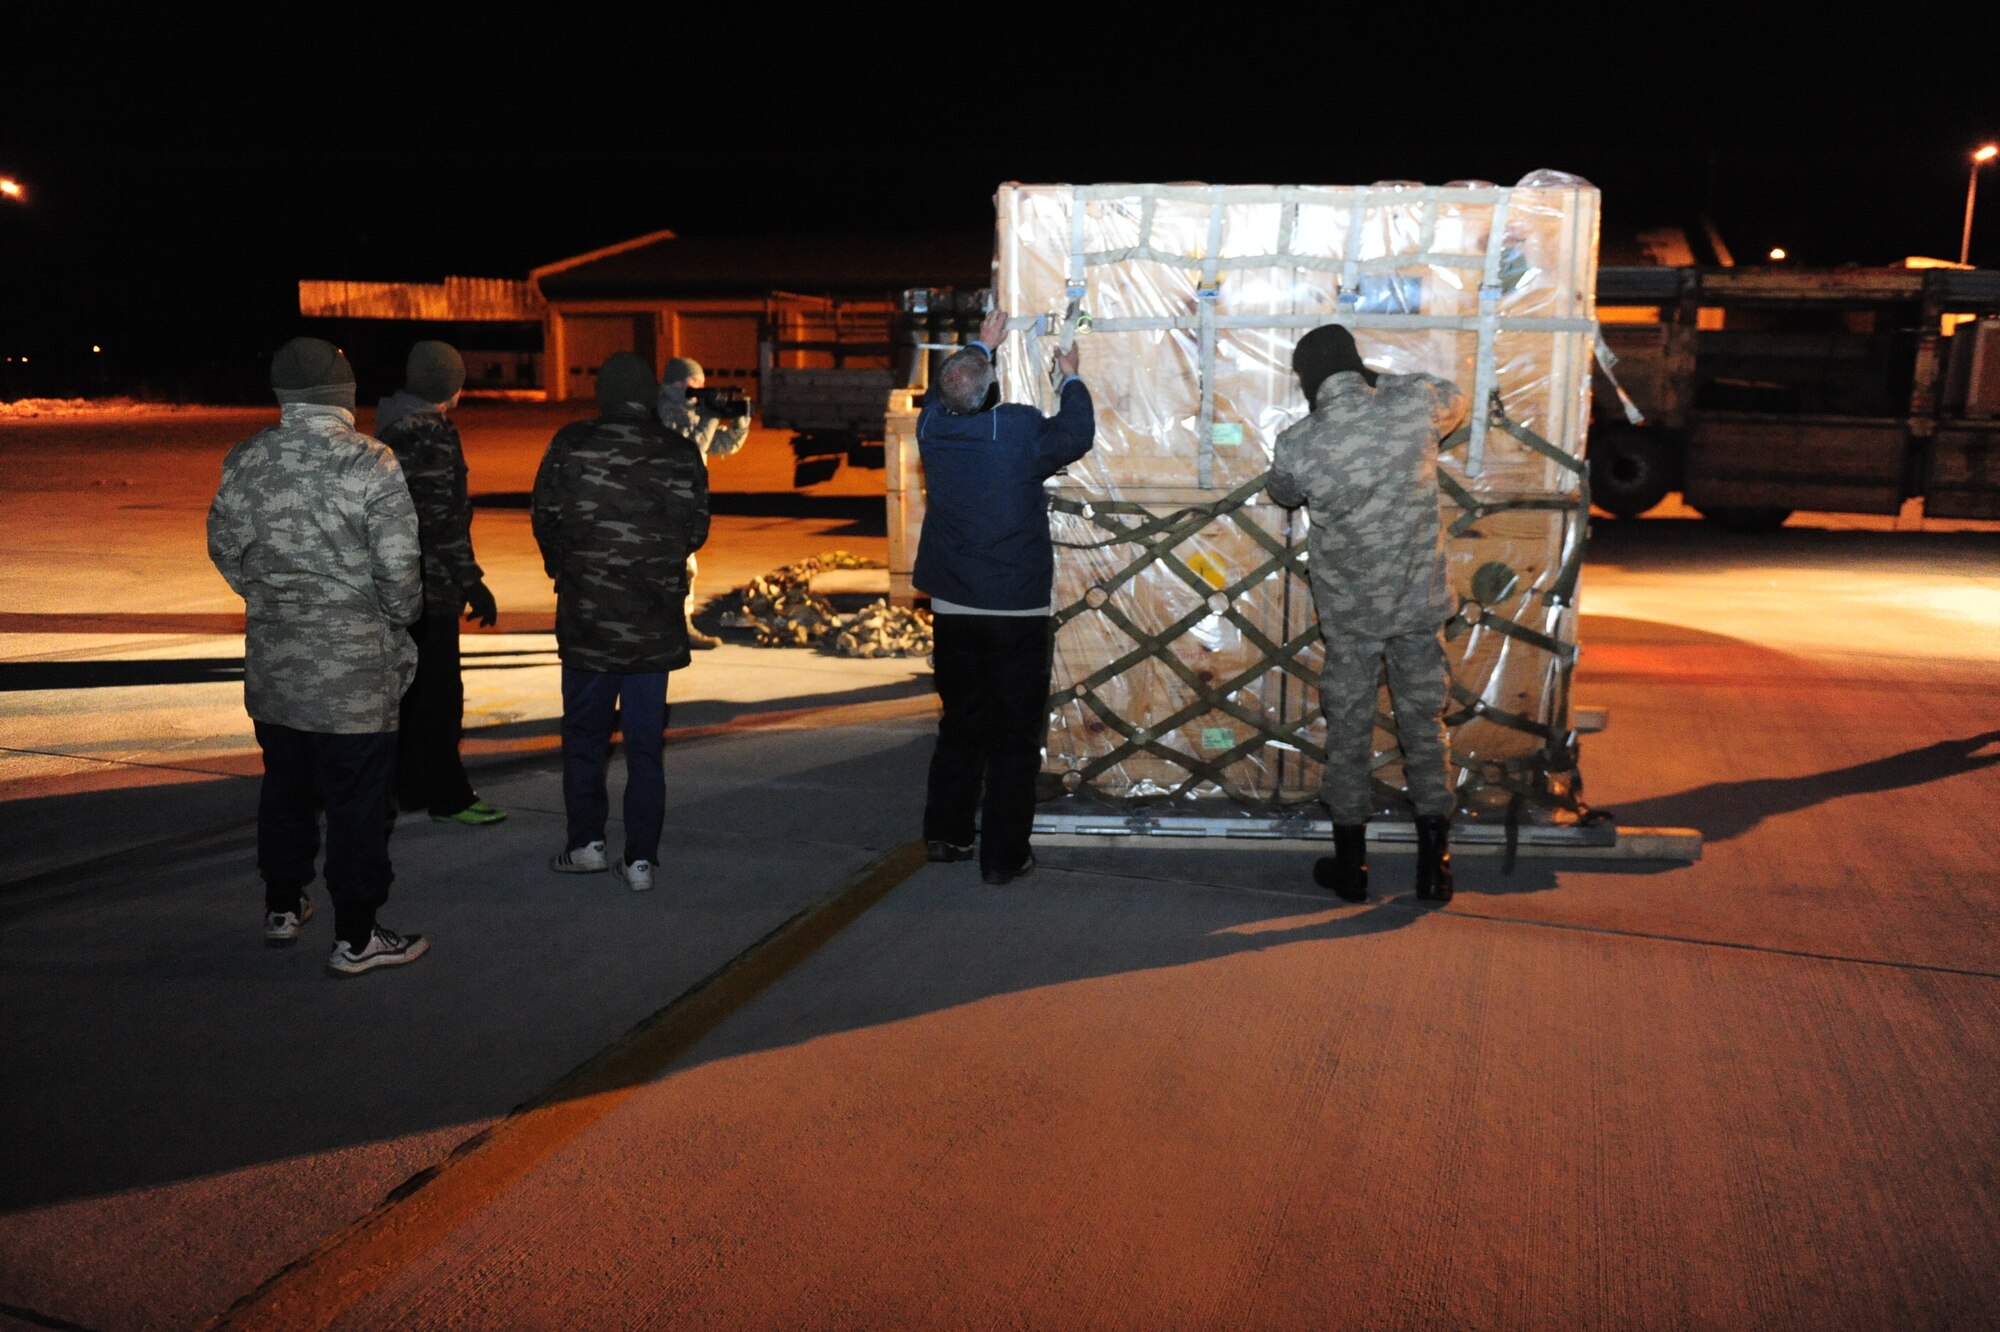 Turkish civilian and military personnel unload pallets of supplies and equipment off a C-130 in Van province, Turkey on Nov. 14. The pallets were flown to Turkey via a C-130J Hercules ???Christine??? to assist in humanitarian relief efforts in the aftermath of two major earthquakes that struck the country. (U.S. Army photo by Spc. Jason A. Blackburn/Released)